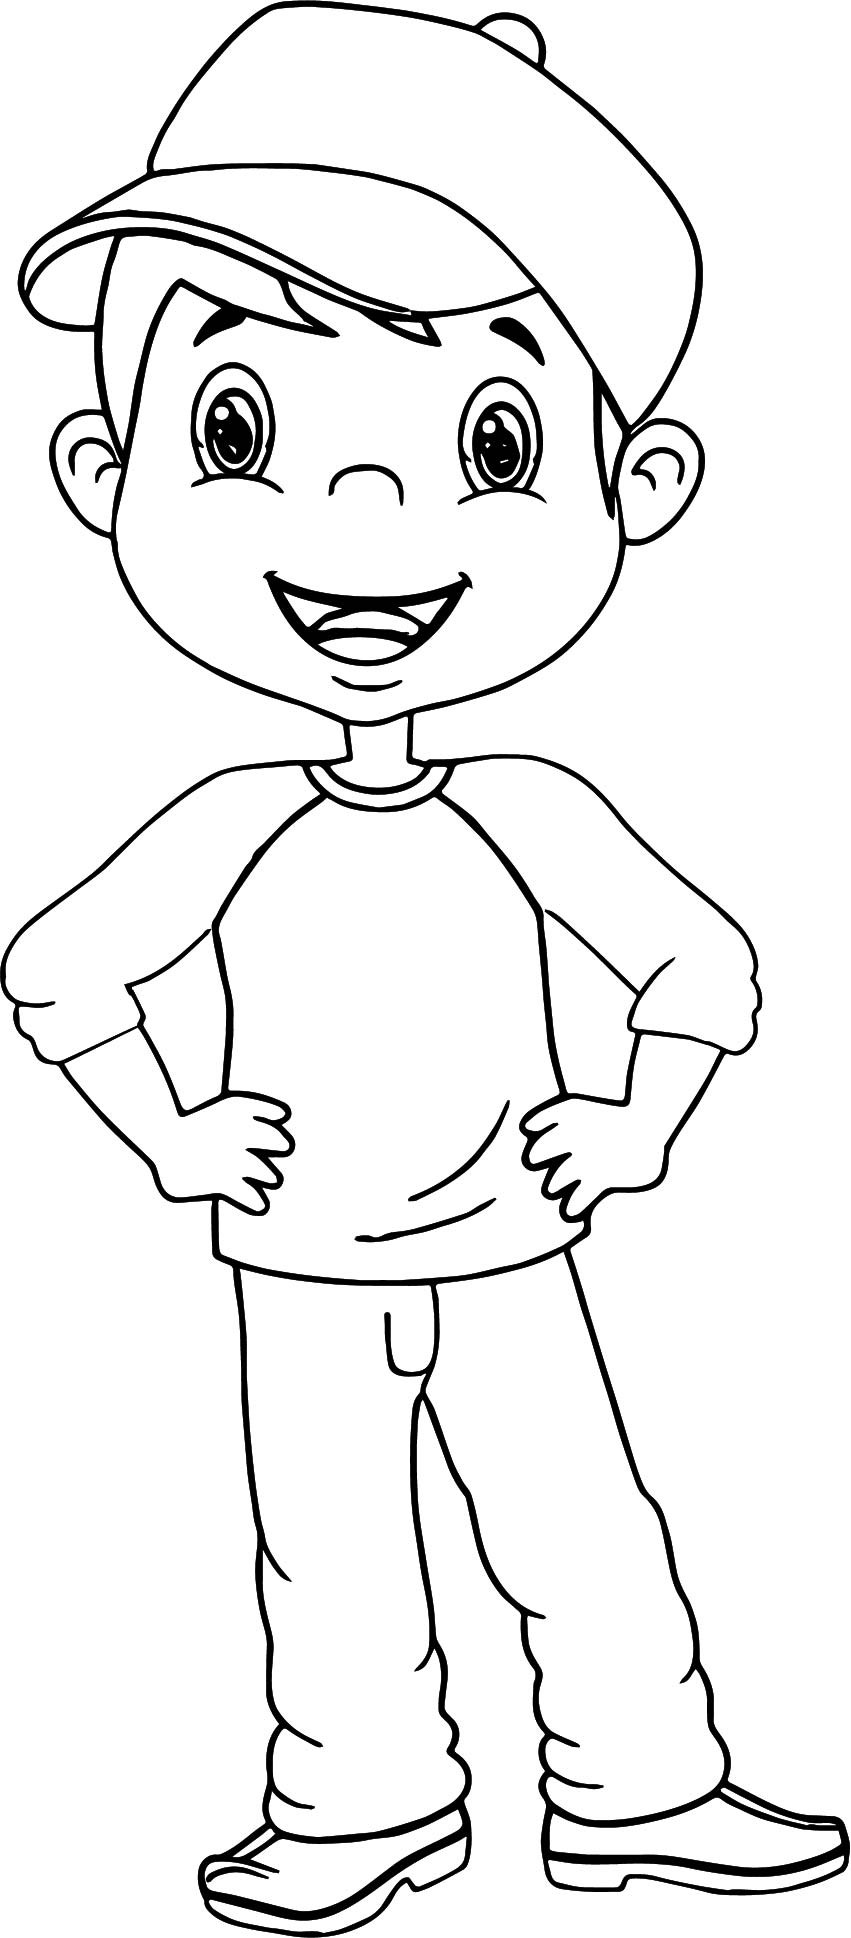 Coloring Pages For Kindergarten Boys
 Cartoon Boy With Hat Coloring Page